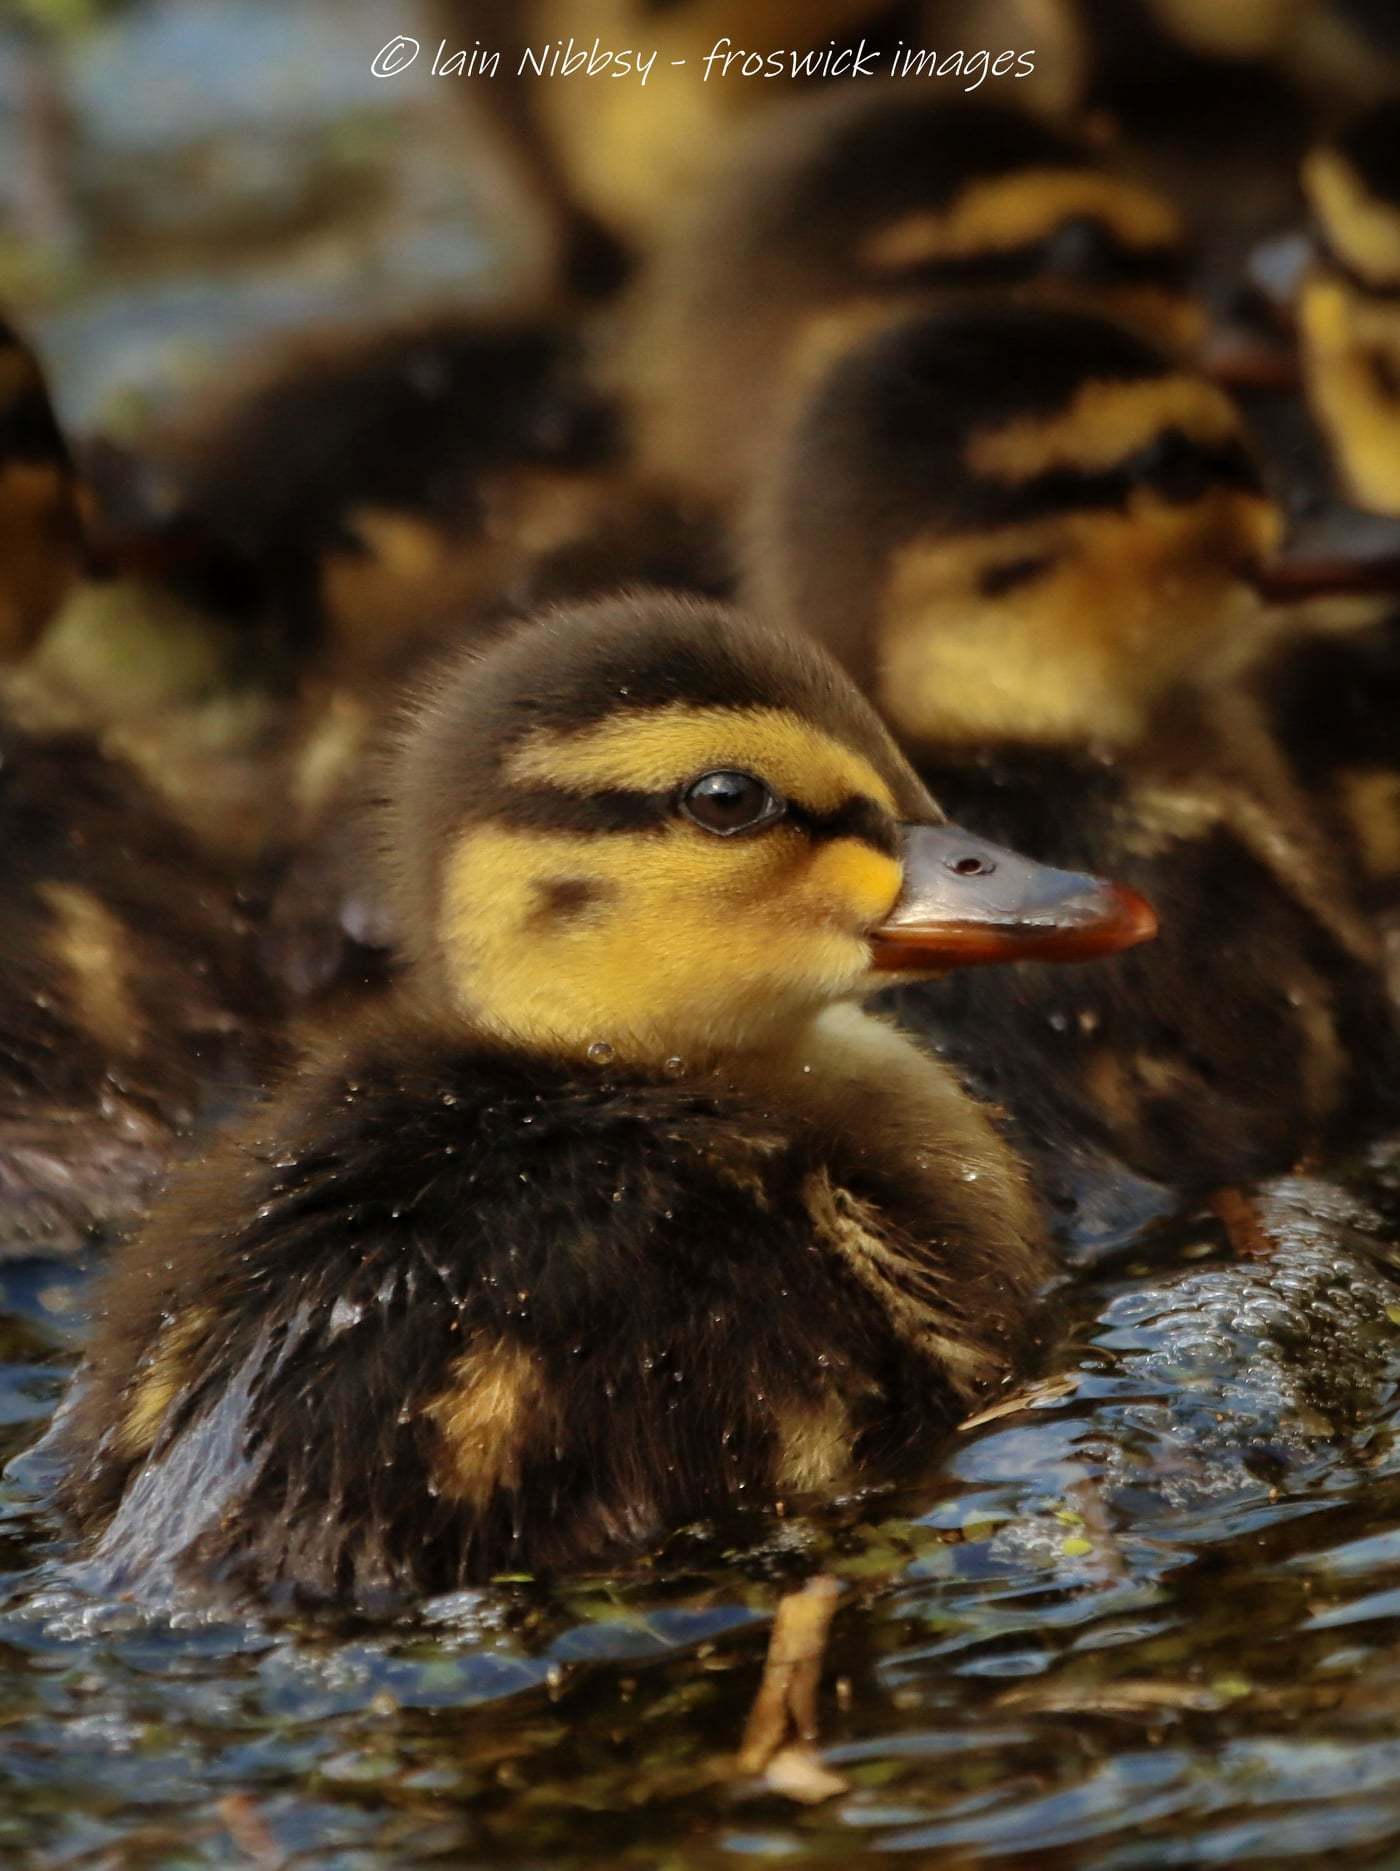 Welcome to the normal world little duckling. Picture: Iain Nibbsy